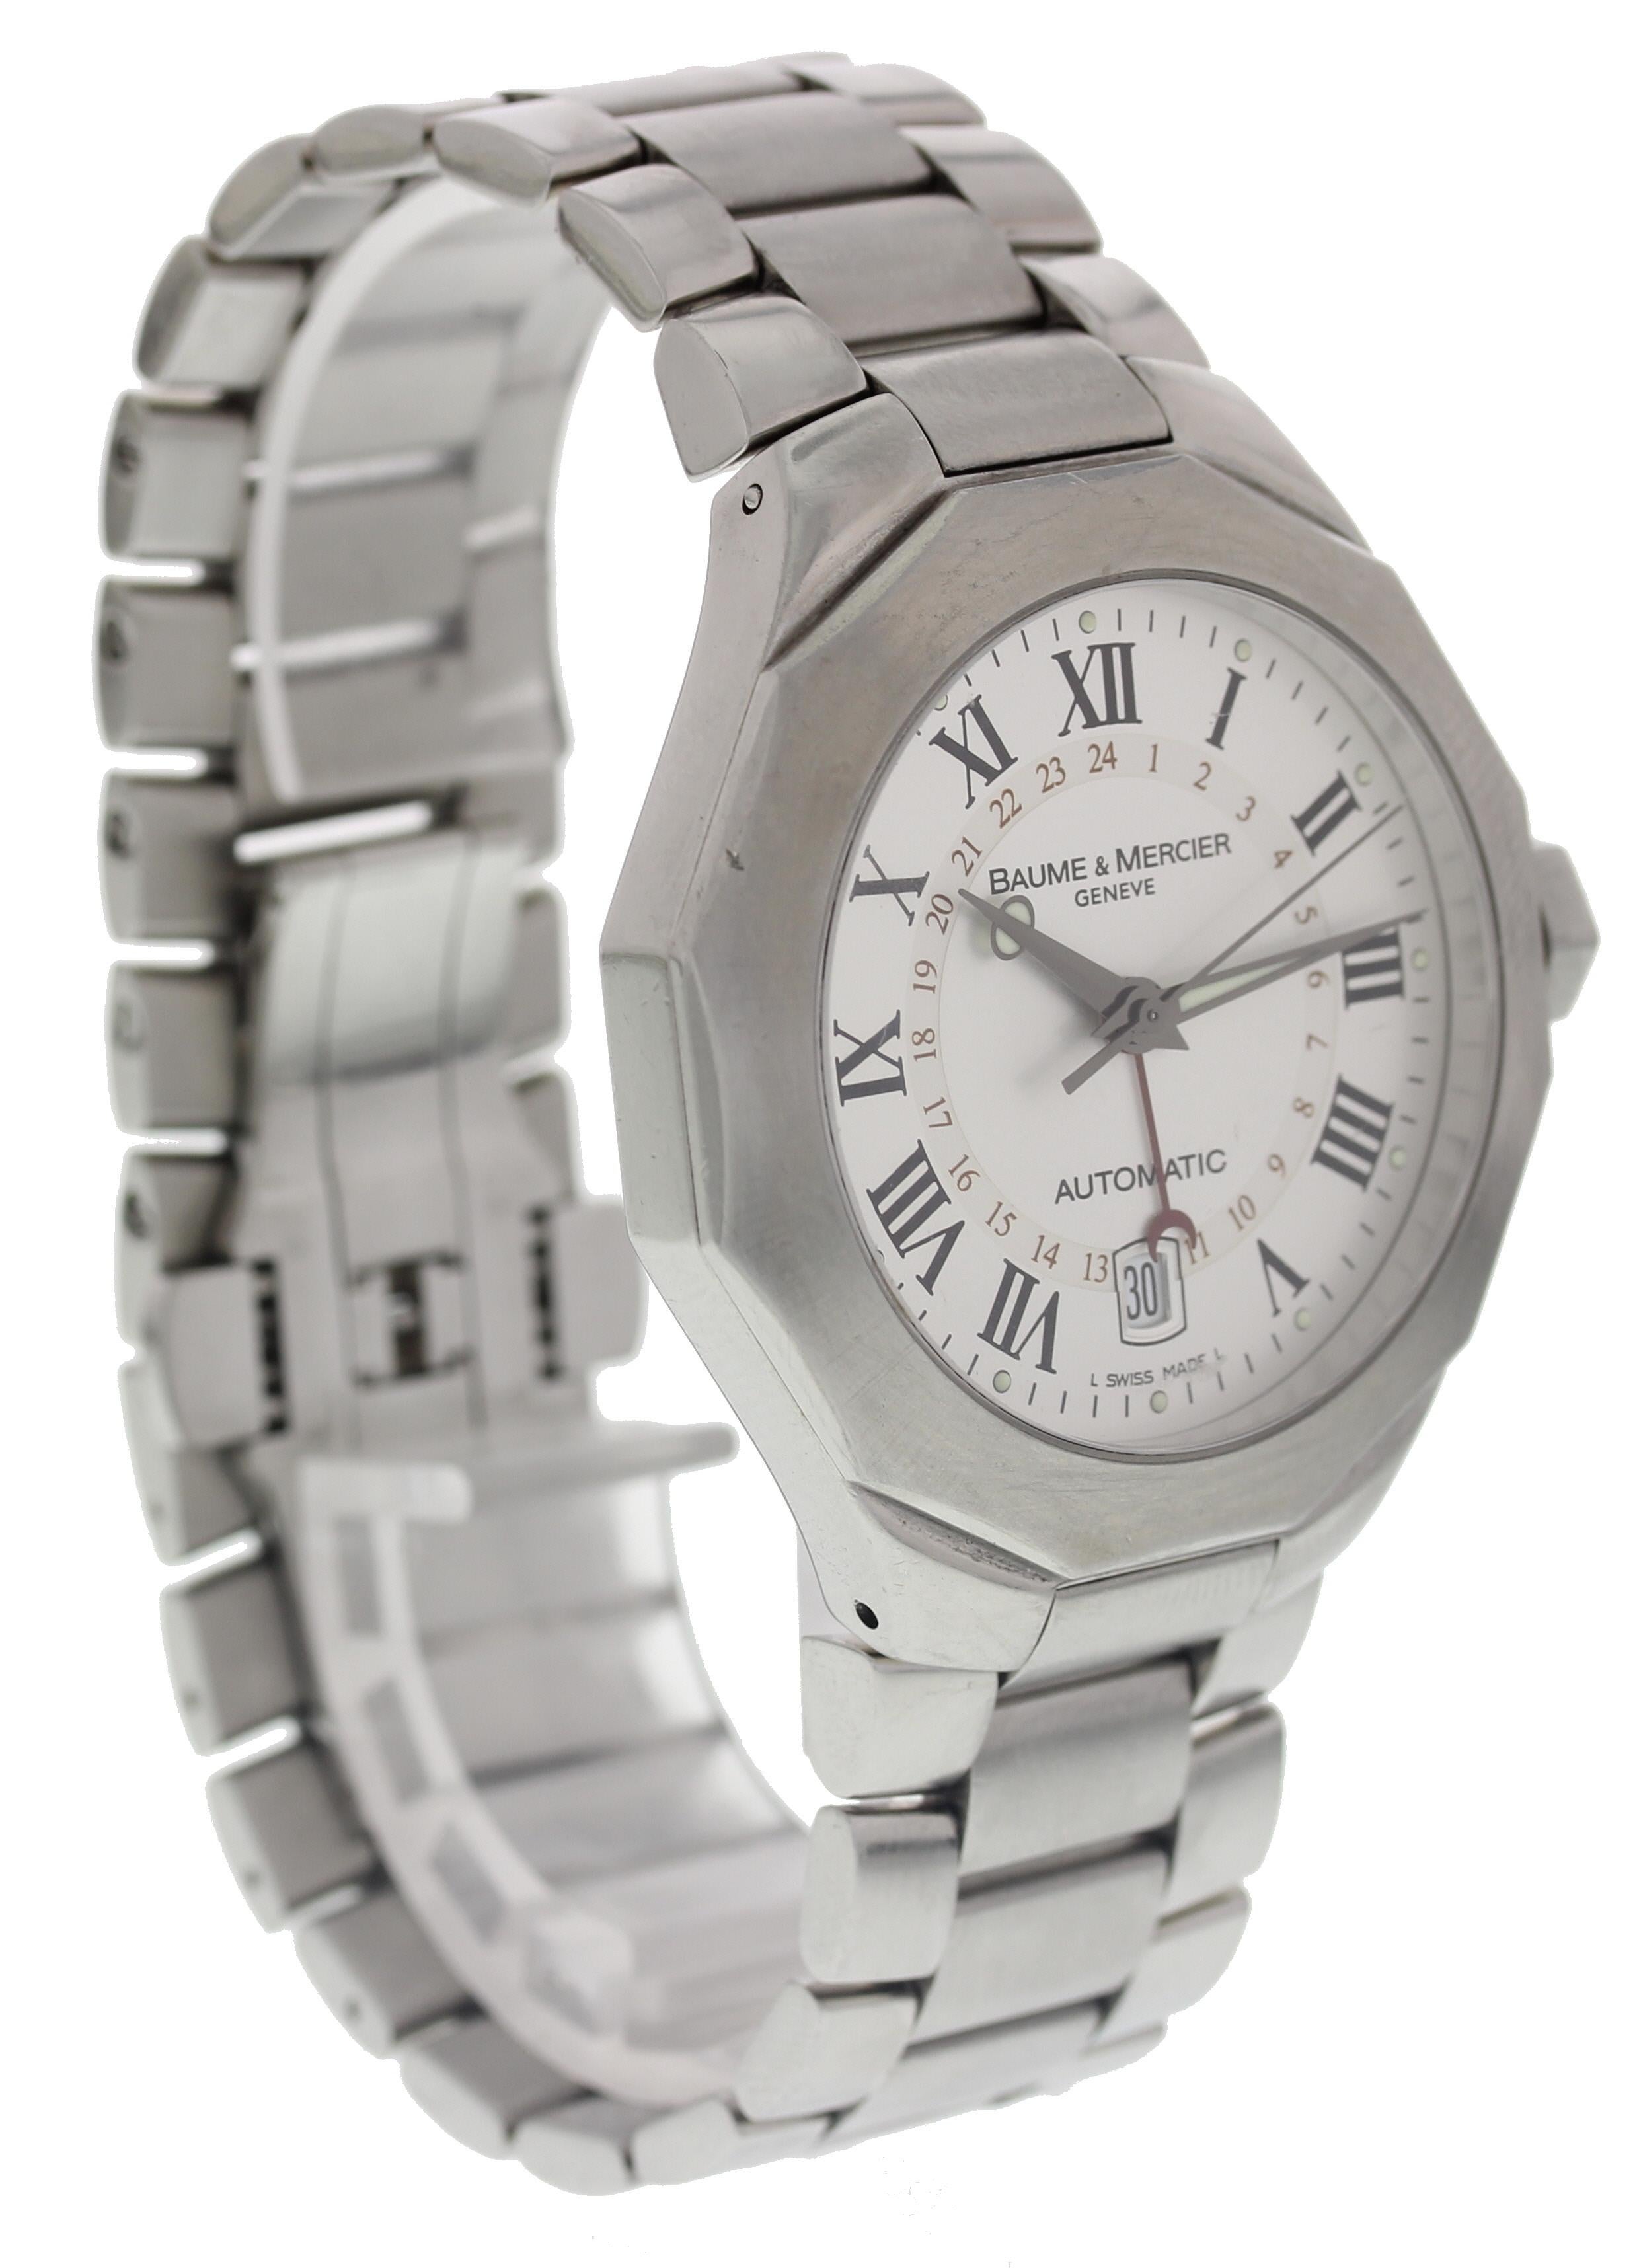 Men's Baume & Mercier Riviera. Stainless steel 40mm case. Stainless steel bracelet will fit a 7.5 inch wrist. Silver dial with roman numeral hour markers, date aperture at 6 o'clock, luminous hands, and 24 hour hand indicator. Automatic movement.